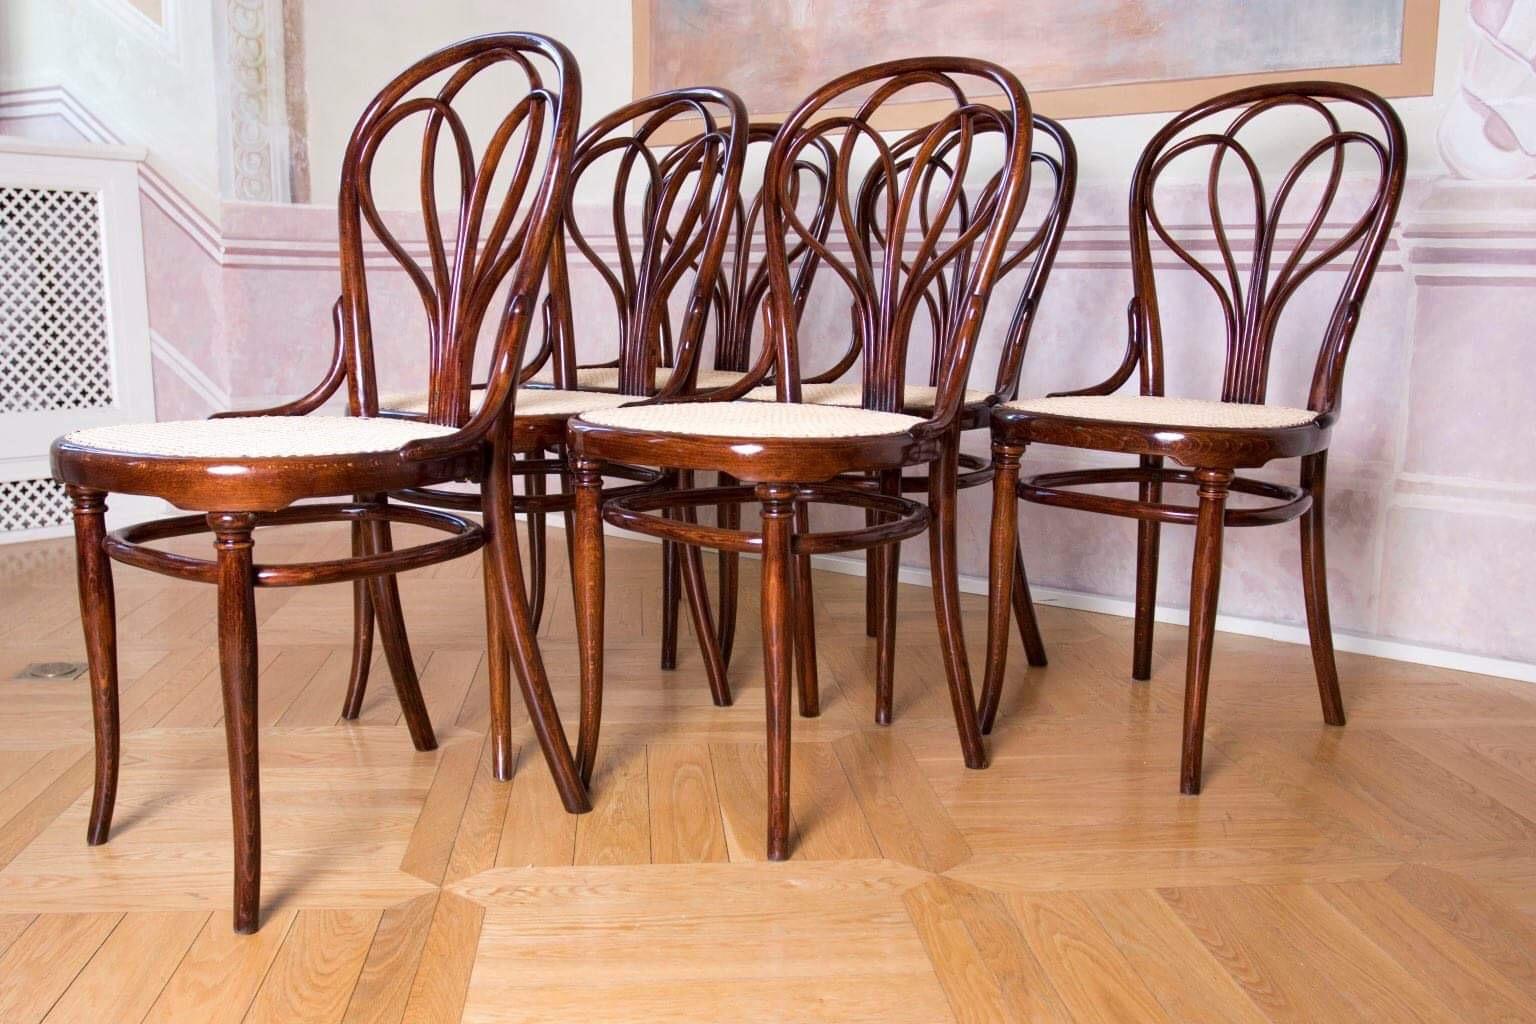 These fan-shaped chairs are beautiful and fully compatible with the Vienna Secession. These chairs have been completely restored and new reeds. It's 9 chairs available.